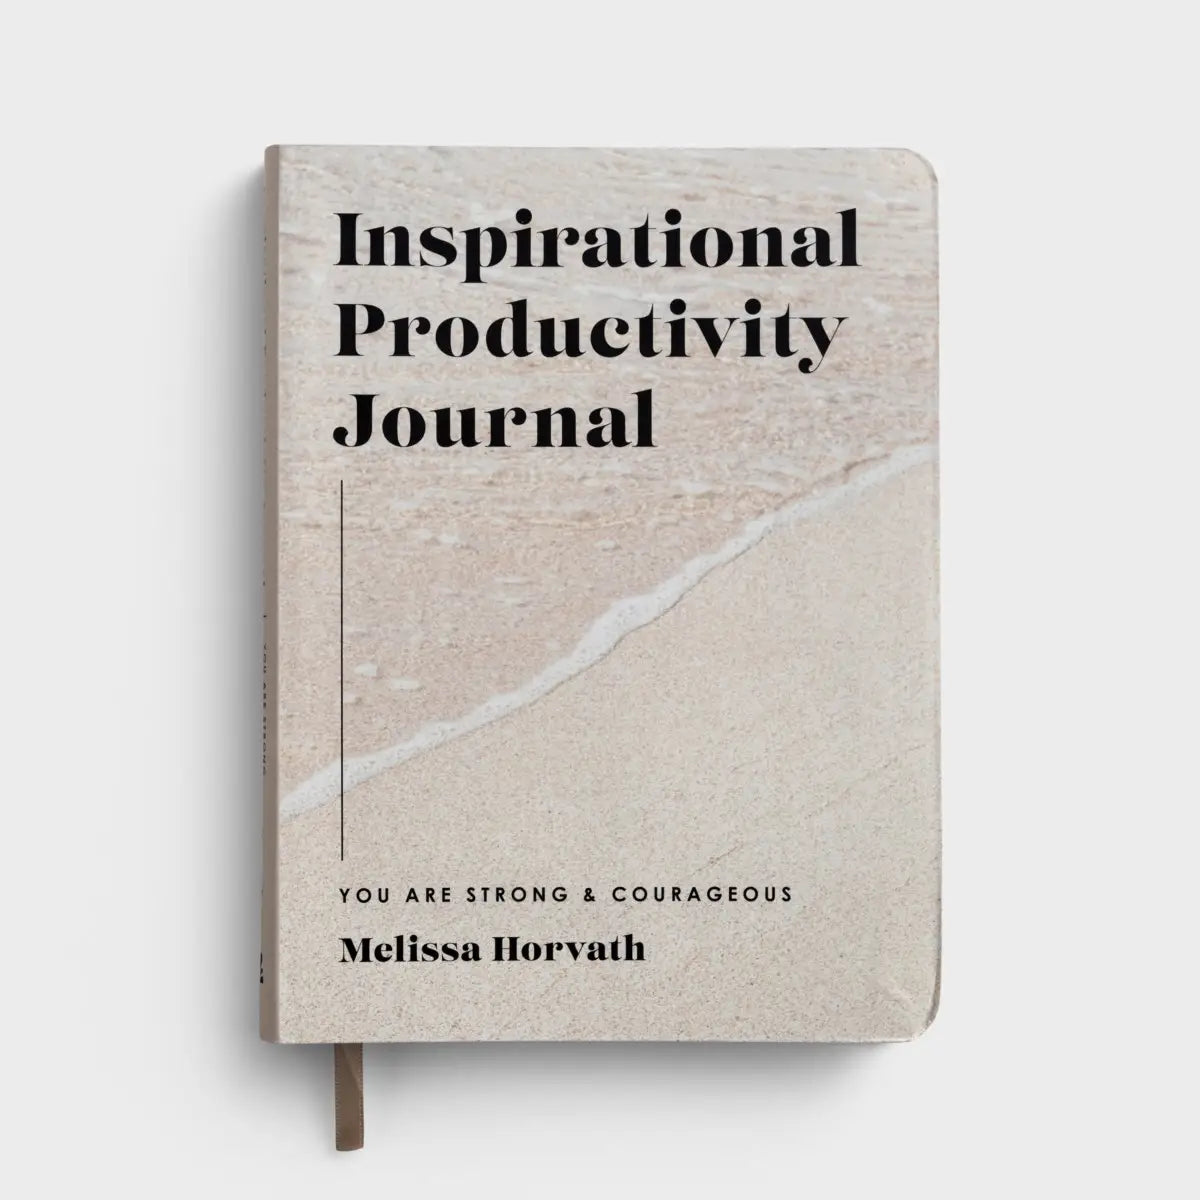 You Are Strong & Courageous: Inspirational Productivity Journal